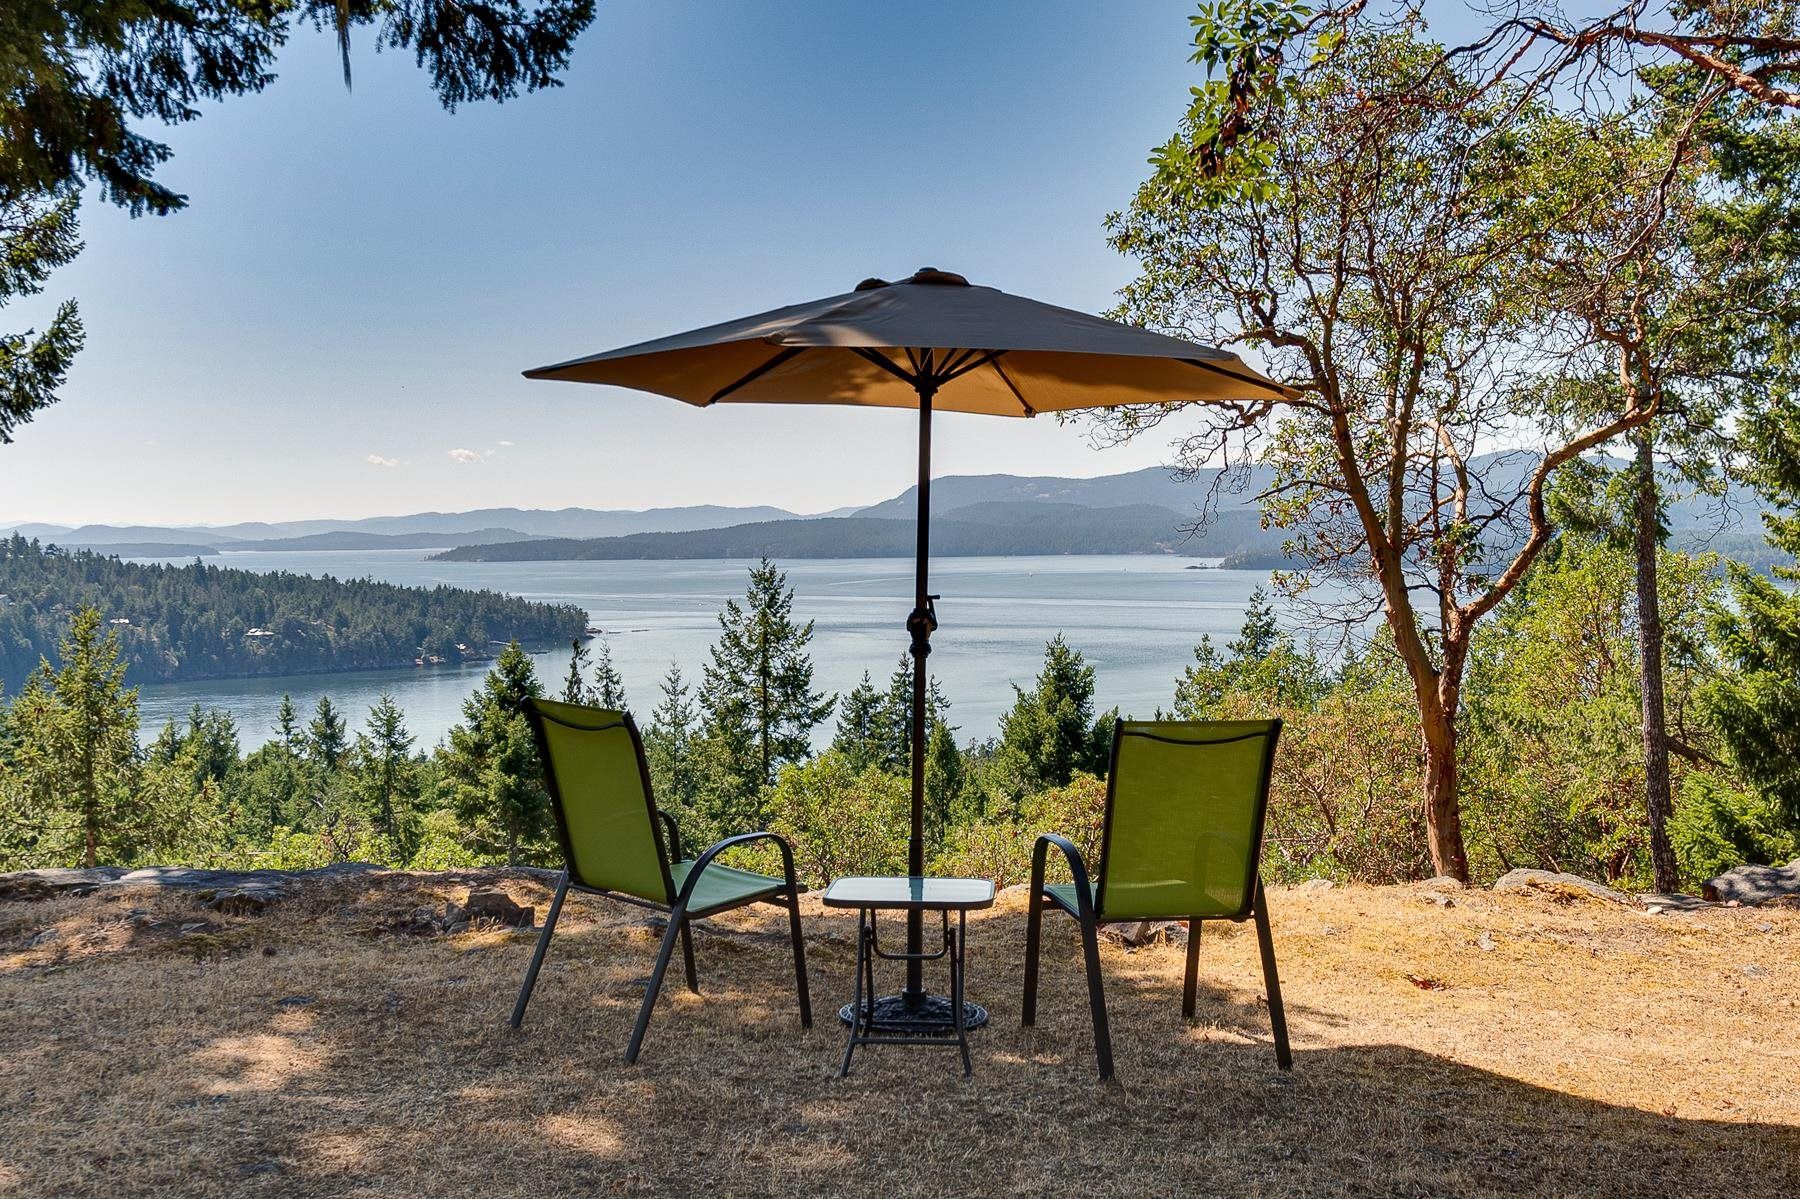 Main Photo: 332 DEACON HILL ROAD in : Mayne Island House for sale : MLS®# R2616787